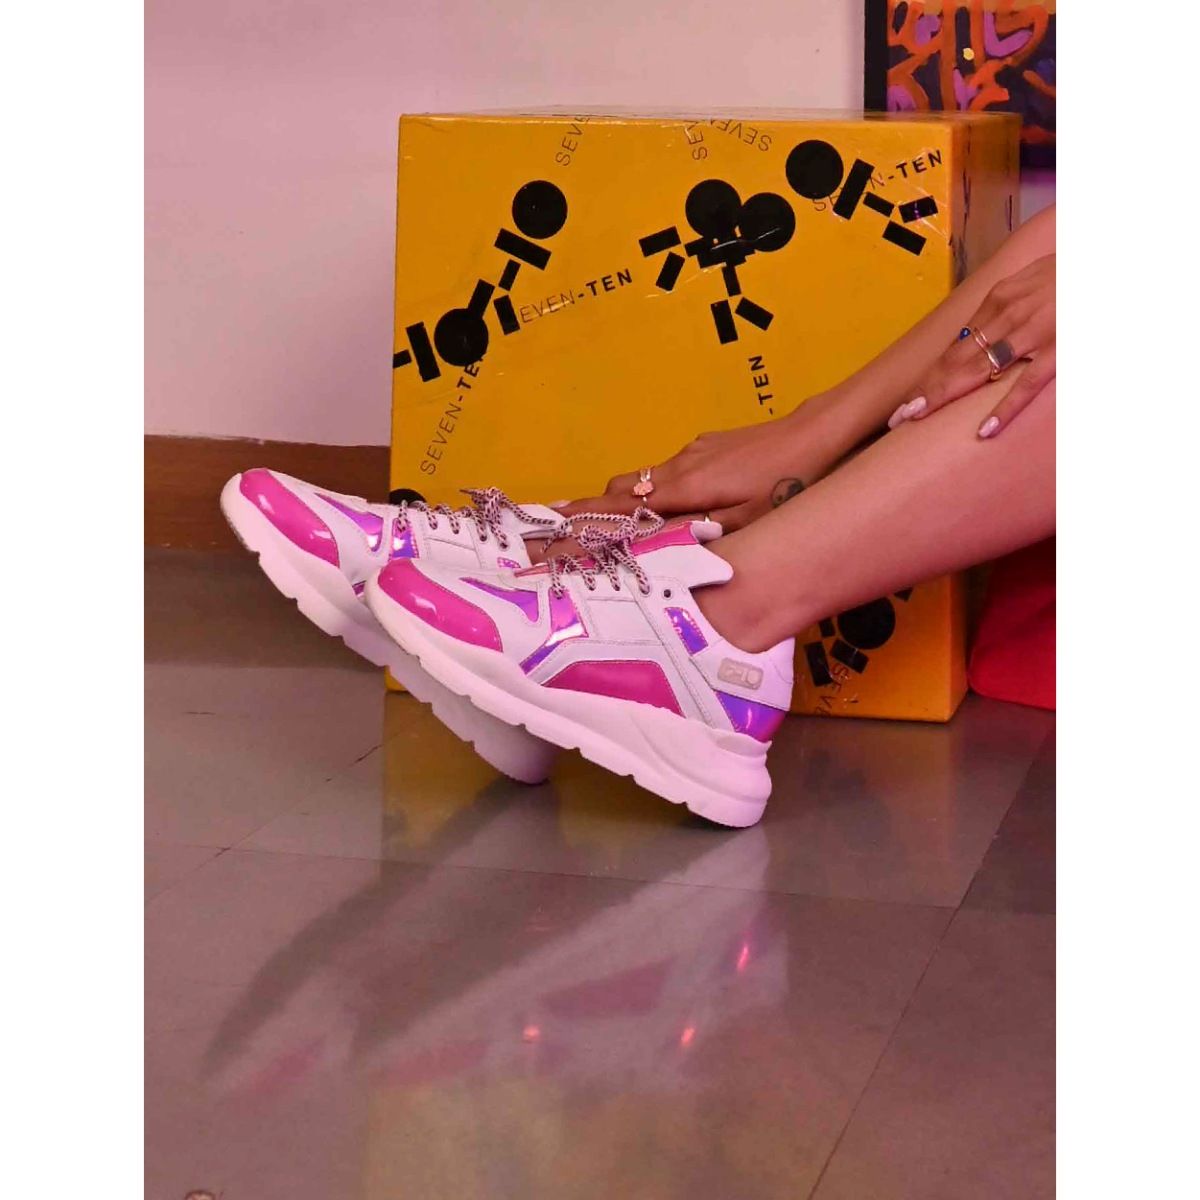 Buy LUCKY STEP Women Holographic Iridescent Metallic Pink White Shoes  Colorful Chunky Dad Sneakers (Rainbow,10 B(M) US) at Amazon.in